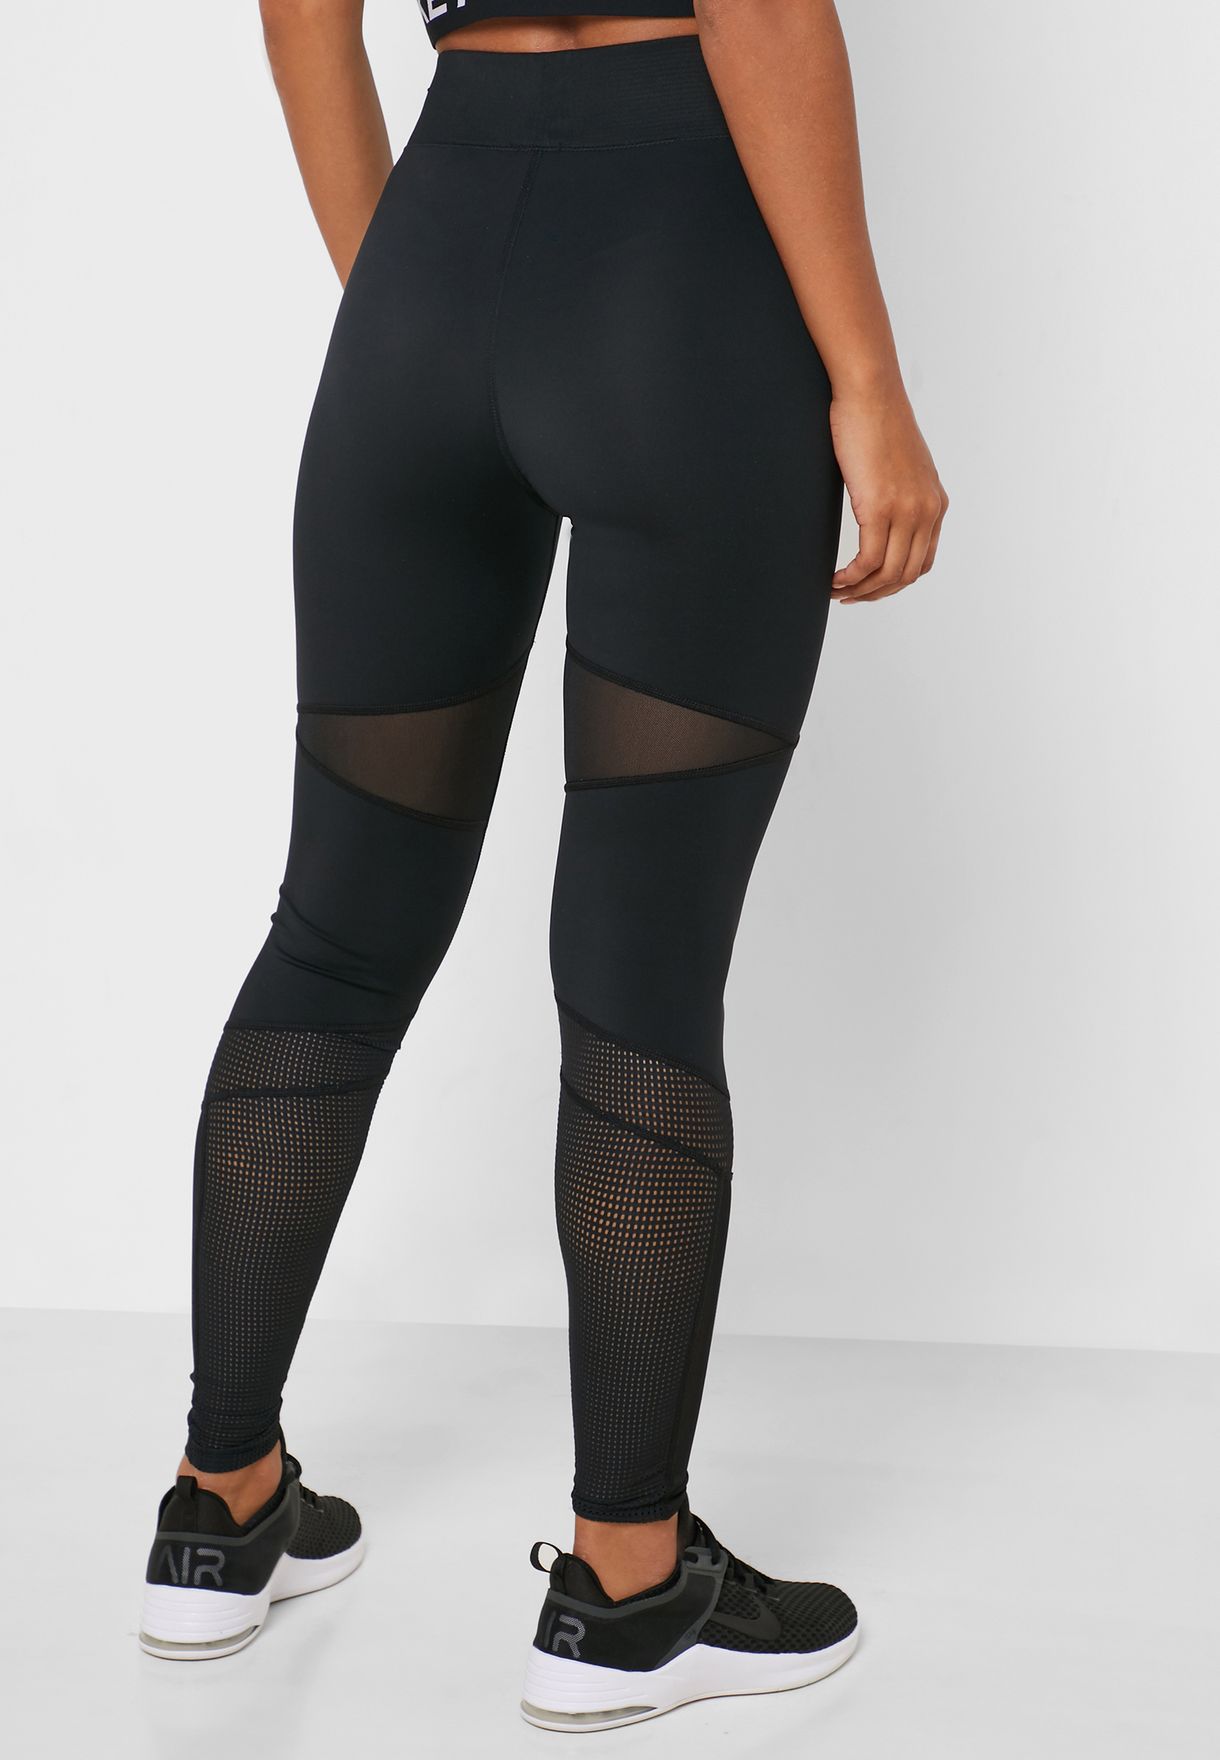 Buy Nike black Pro Luxe Mesh Tights for 